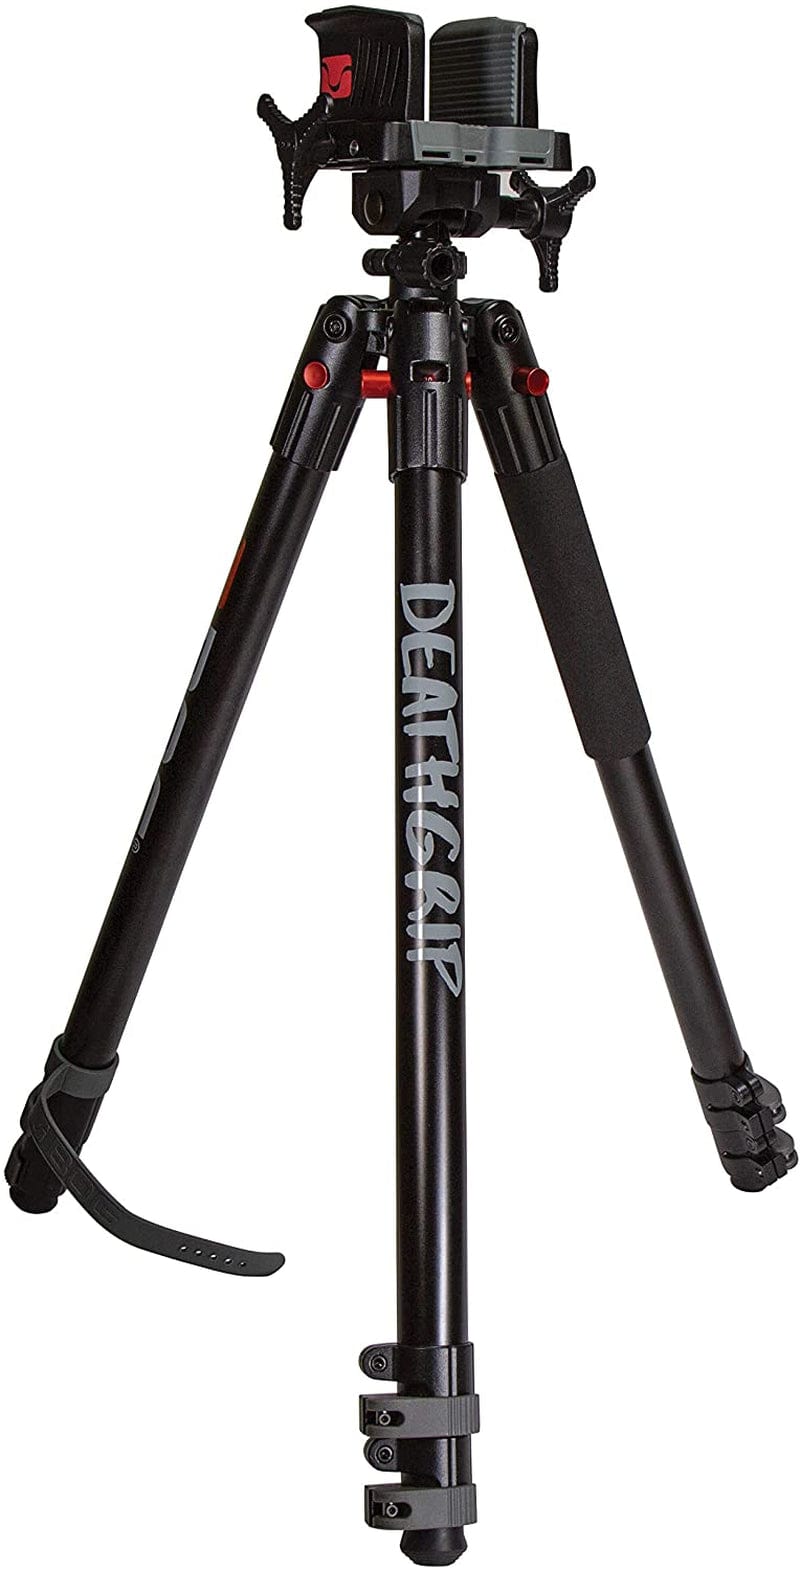 BOG Deathgrip Tripods with Durable Aluminum and Carbon Fiber Frames, Lightweight, Stable Design, Bubble Level, Adjustable Legs, and Hands-Free Operation for Hunting, Shooting, and Outdoors Sporting Goods > Outdoor Recreation > Winter Sports & Activities BOG   